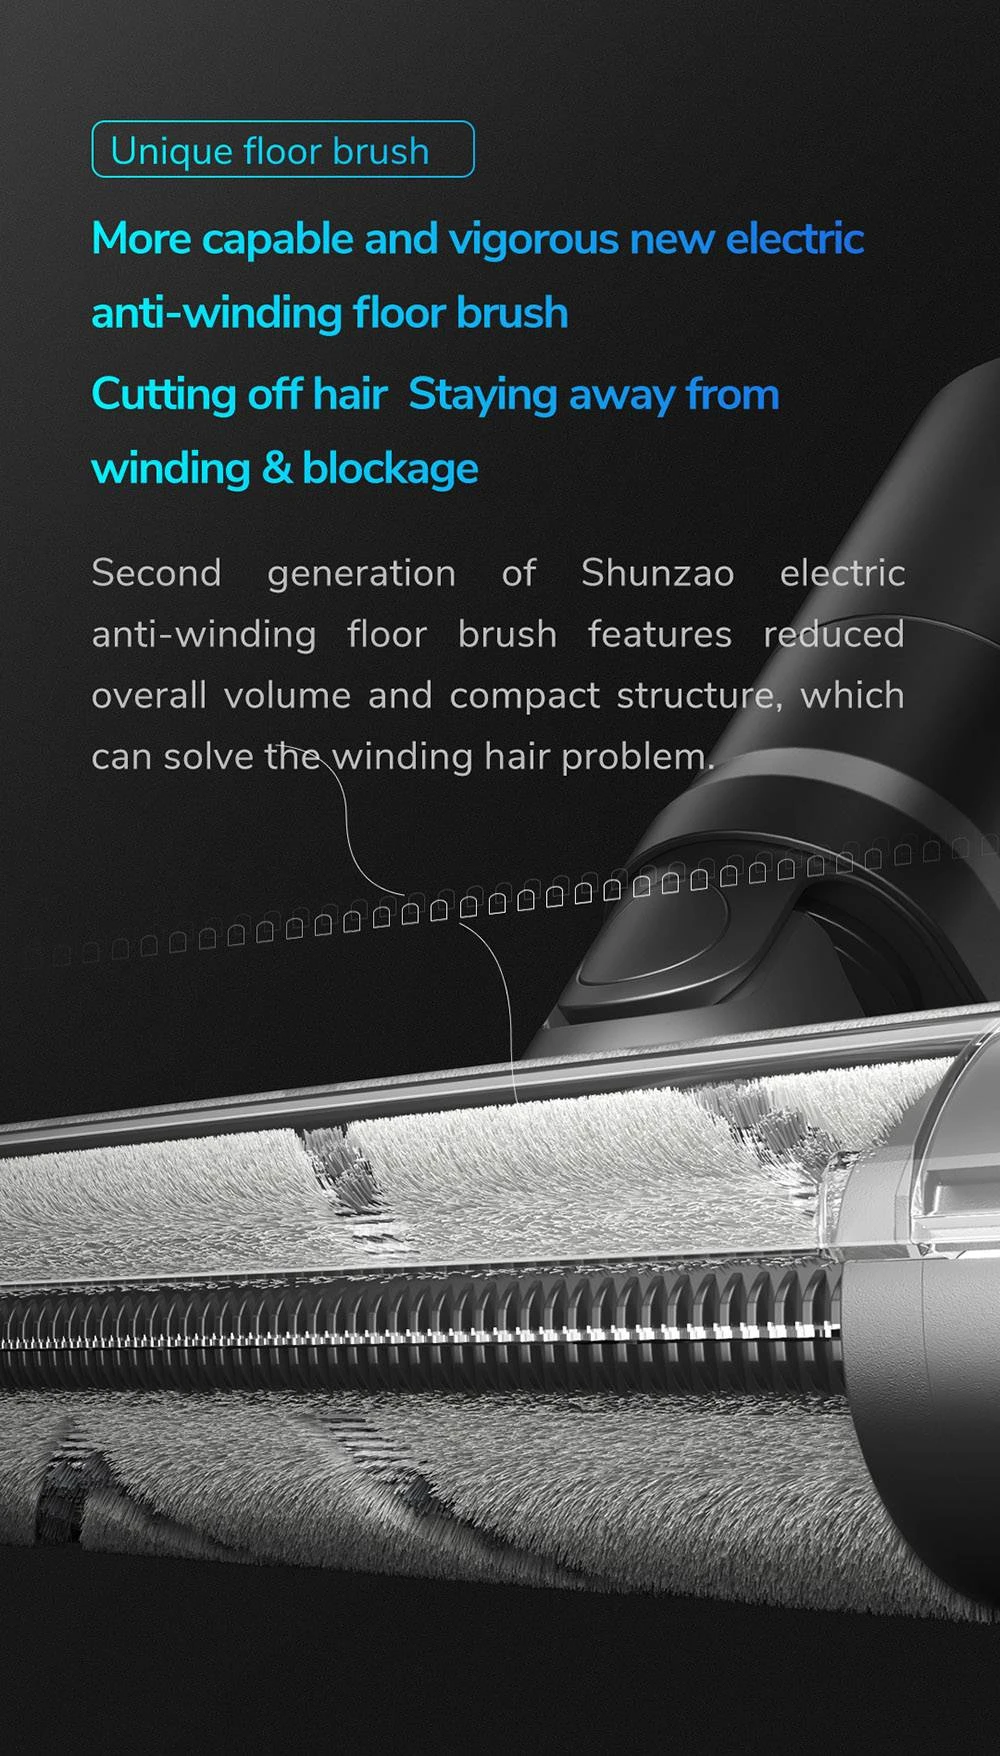 Shunzao Z15 Handheld Vacuum Cleaner 30KPa Powerful Suction 210AW Brushless Motor 60 Minute Run Time LED Display